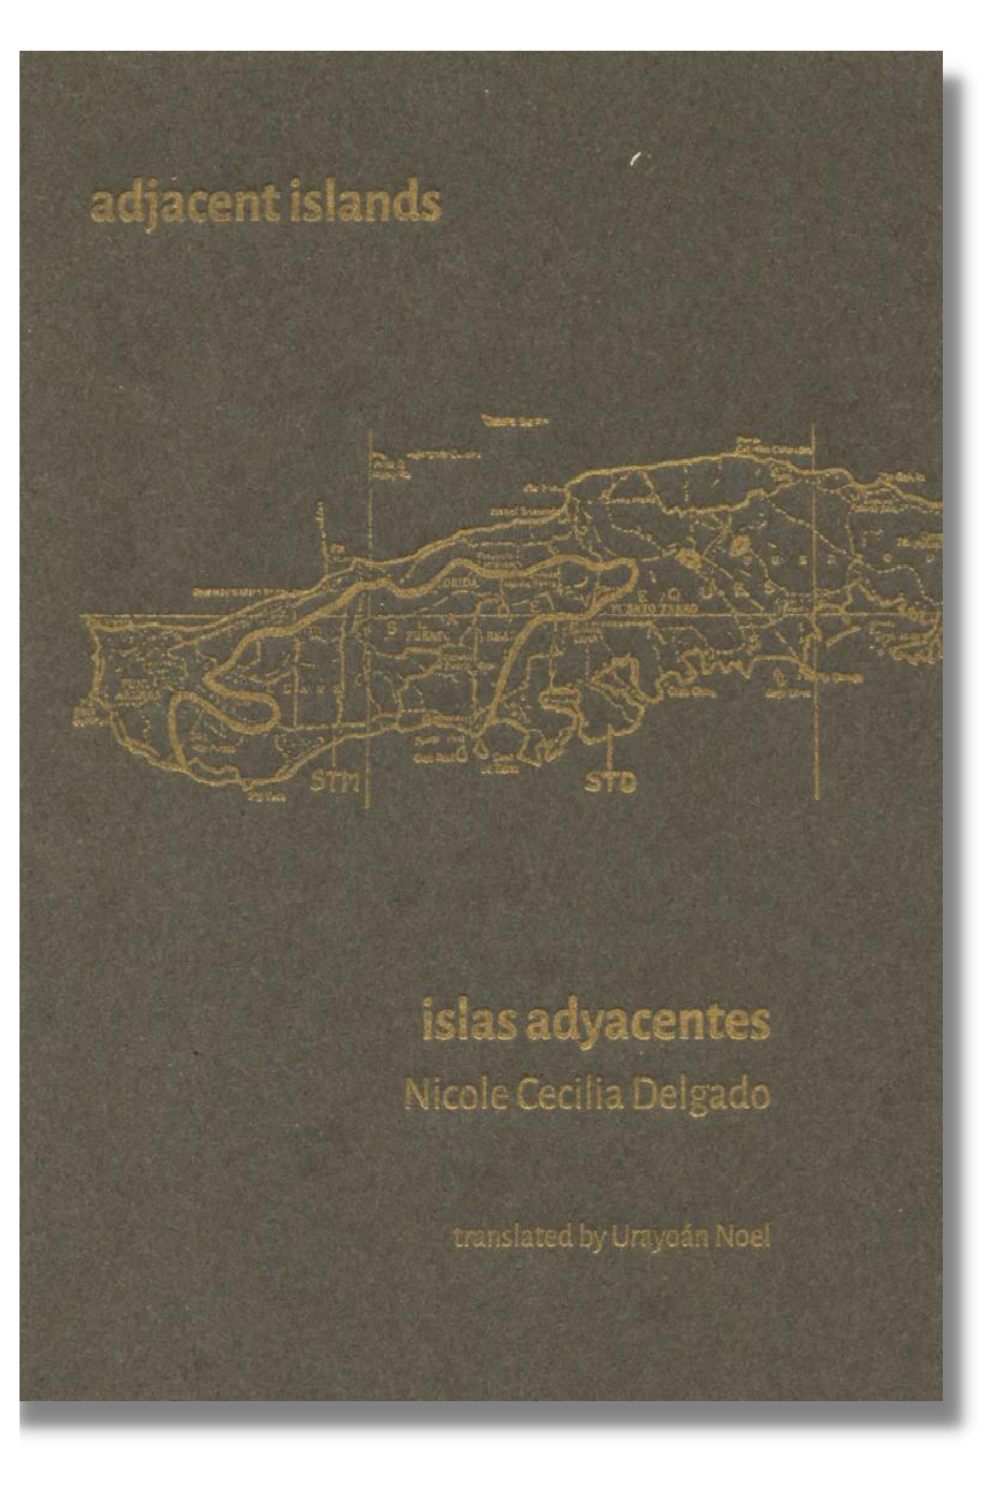 The cover of "Adjacent Islands"